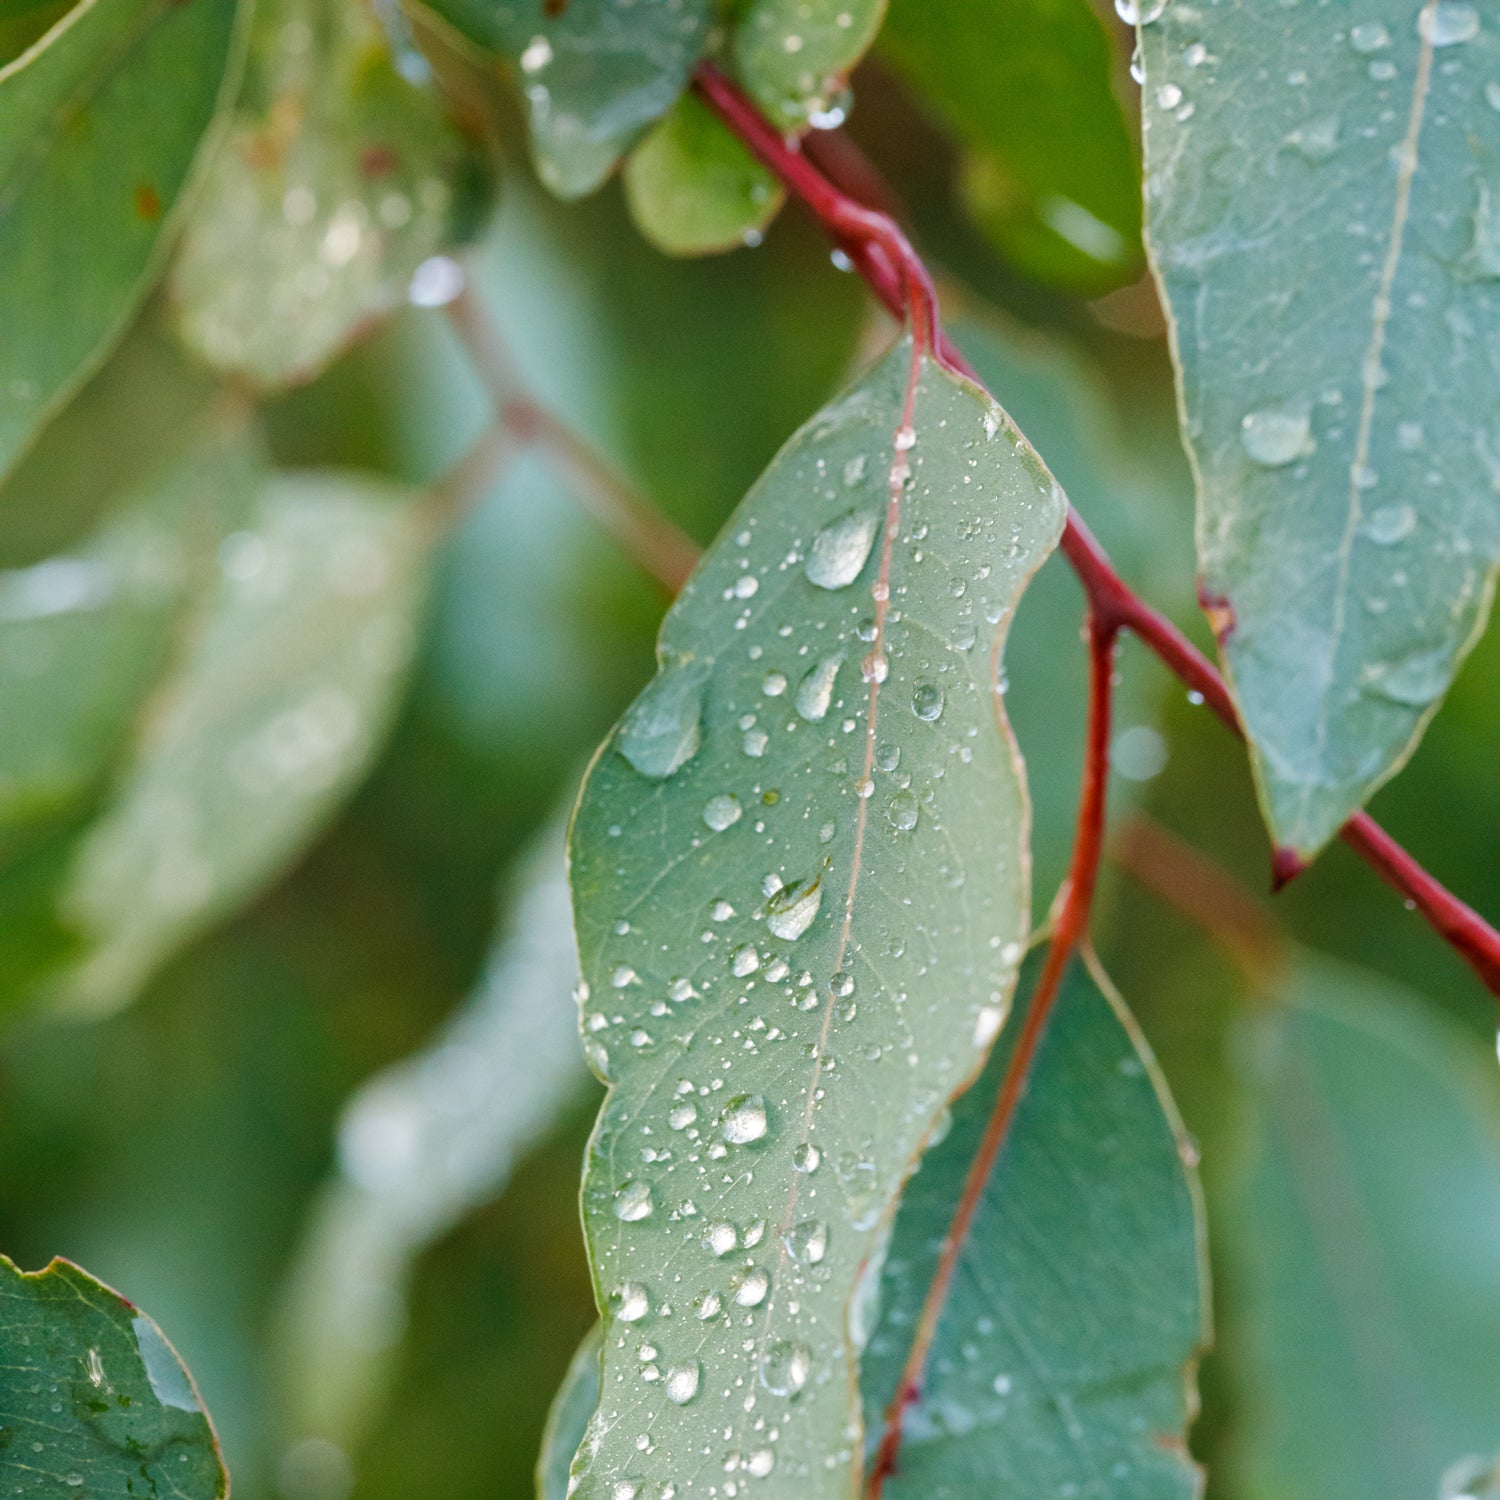 A closeup photo of a eucalyptus leave covered in raindrops. - this sensation is captured in the "Eucalyptus Rain" scented candle from Tuscany candle.